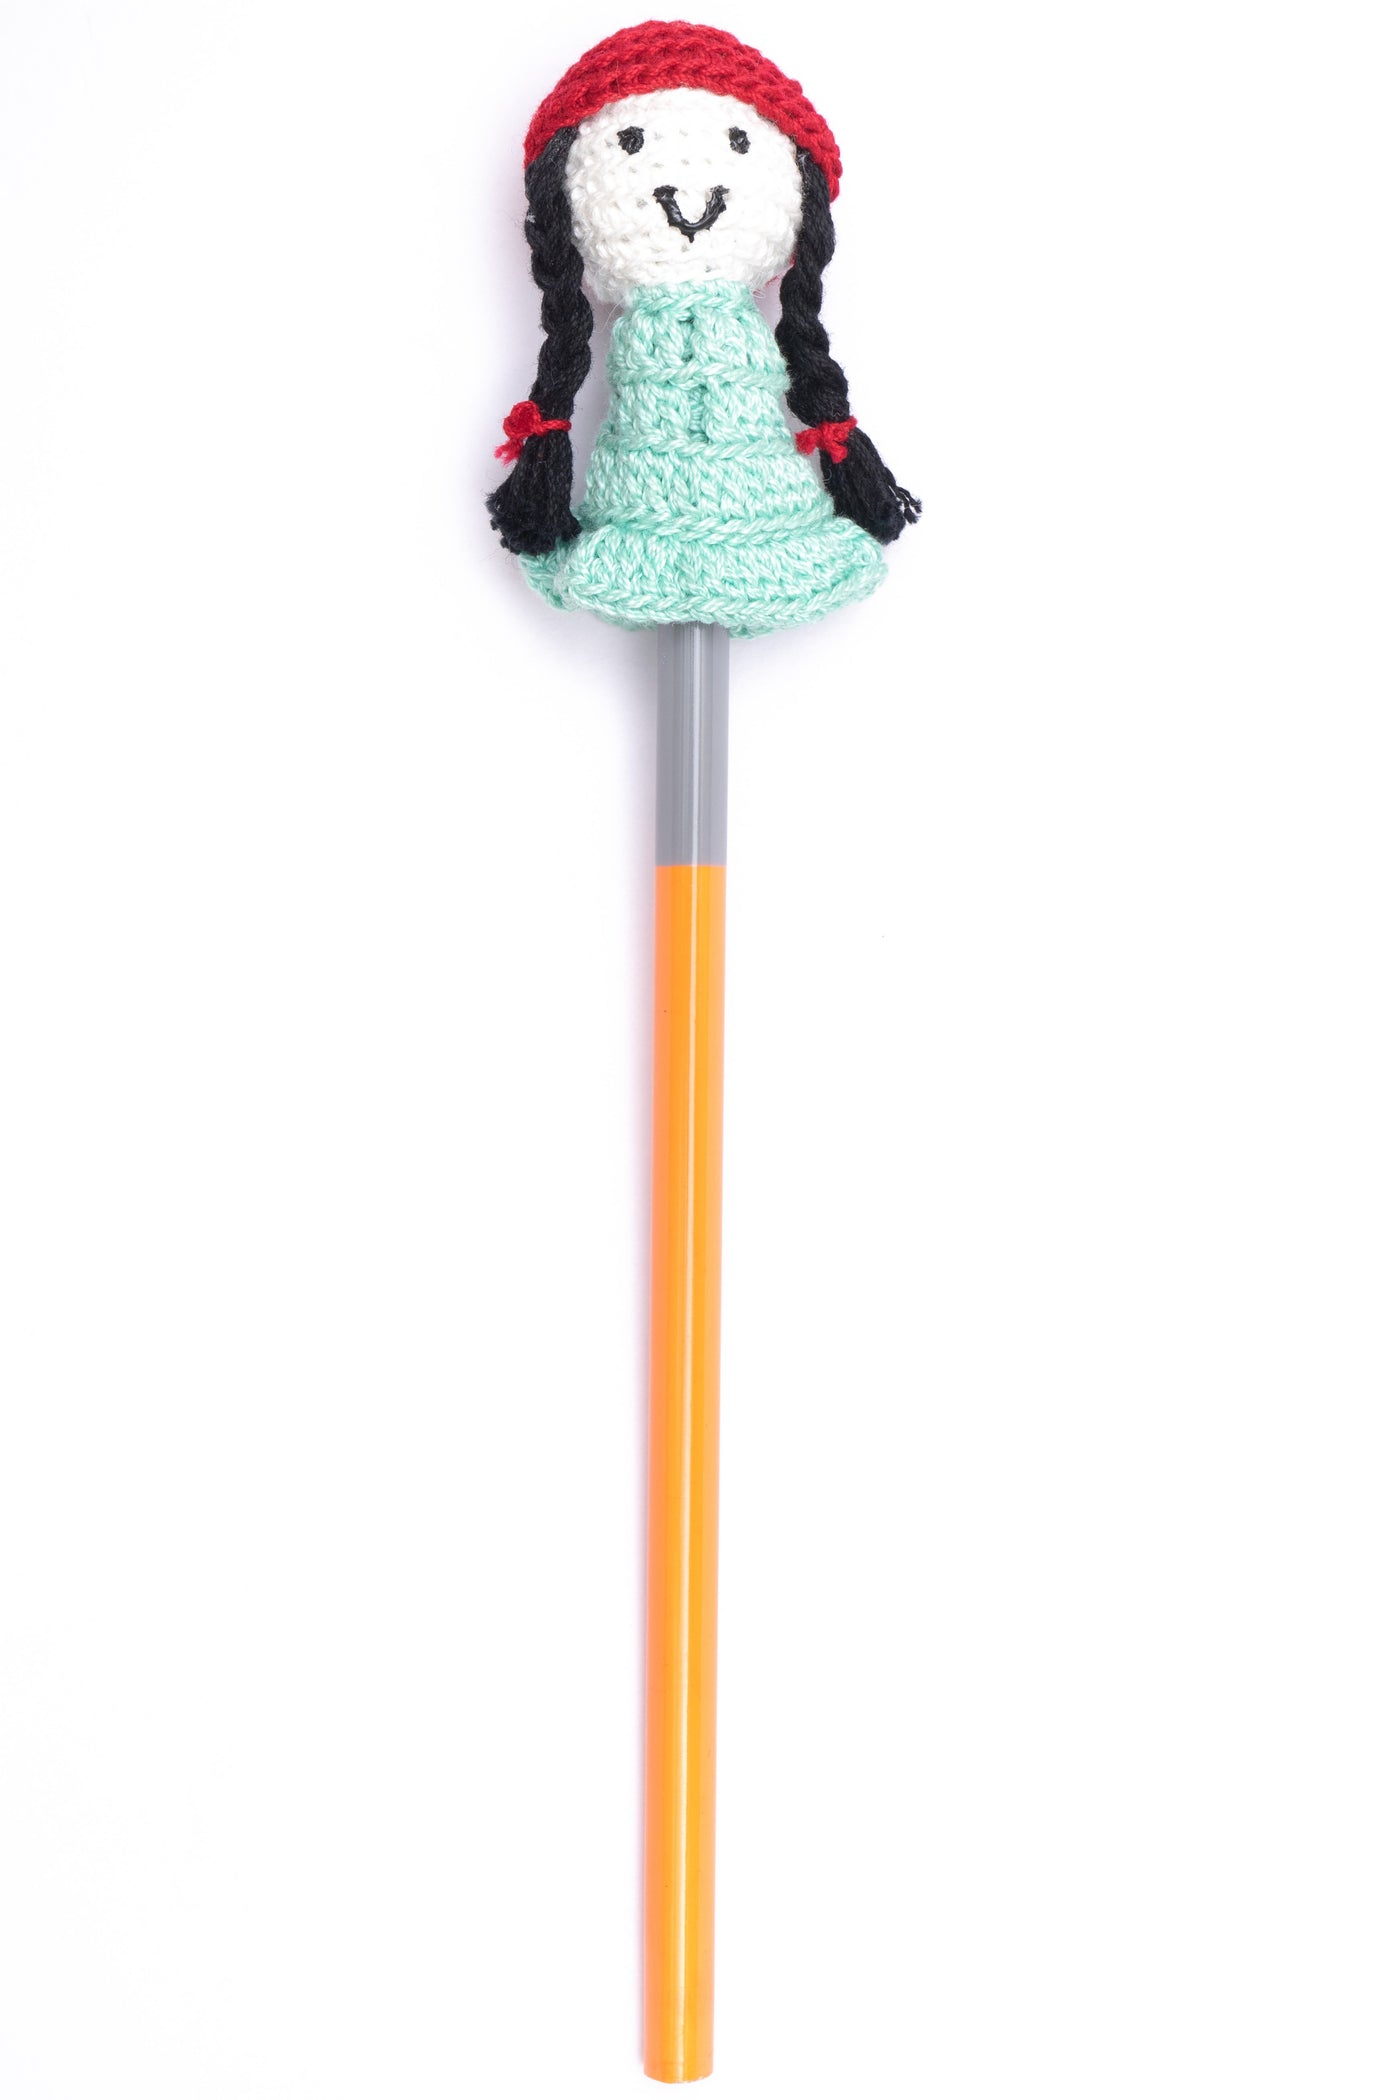 Adorable handcrafted Blue doll Pencil Topper